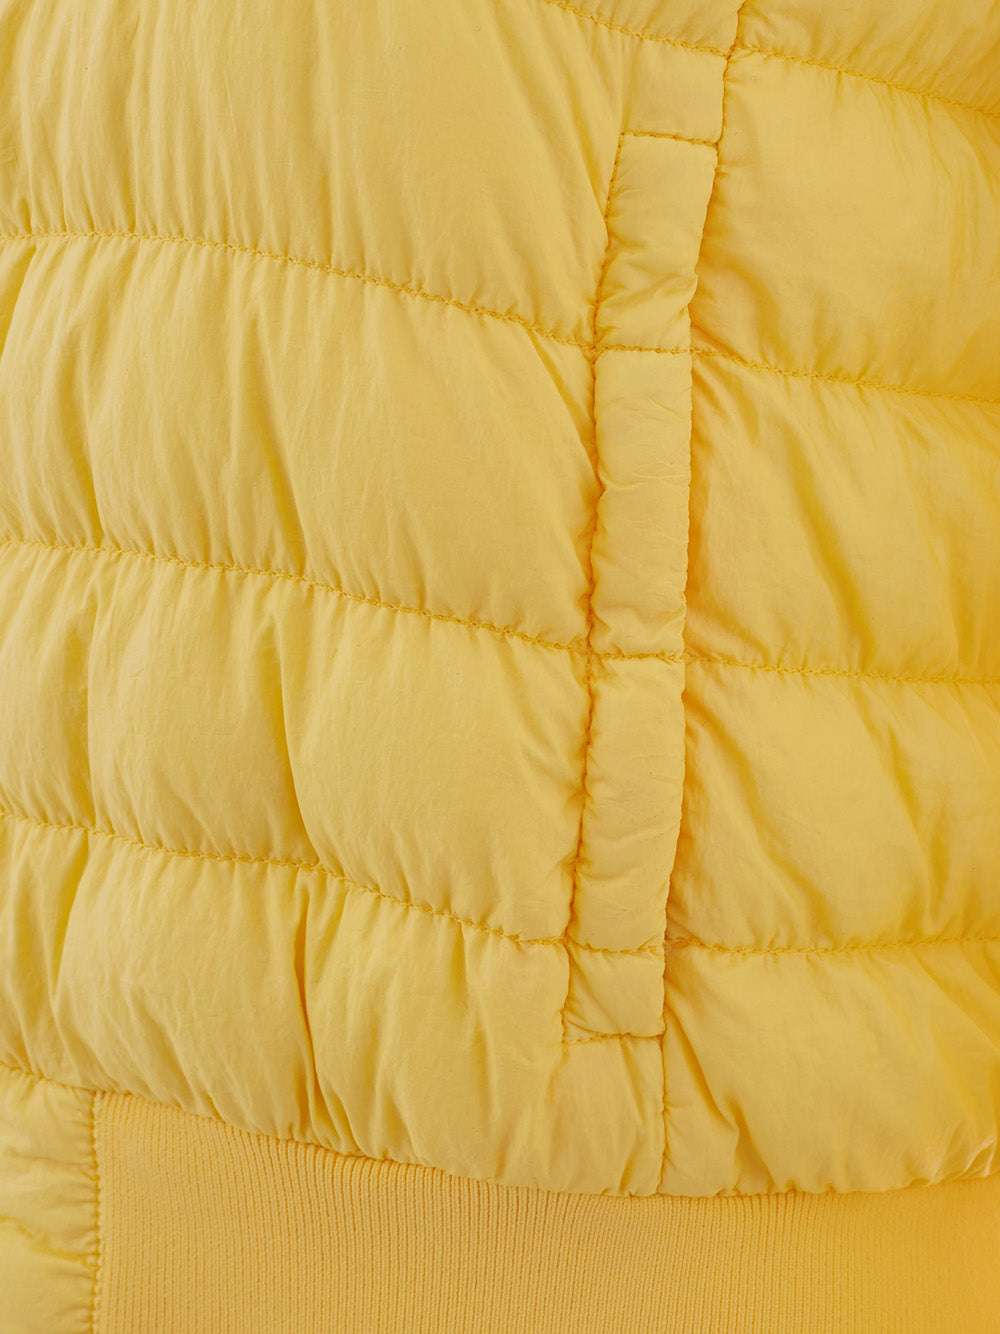 Yellow Quilted Bomber Jacket